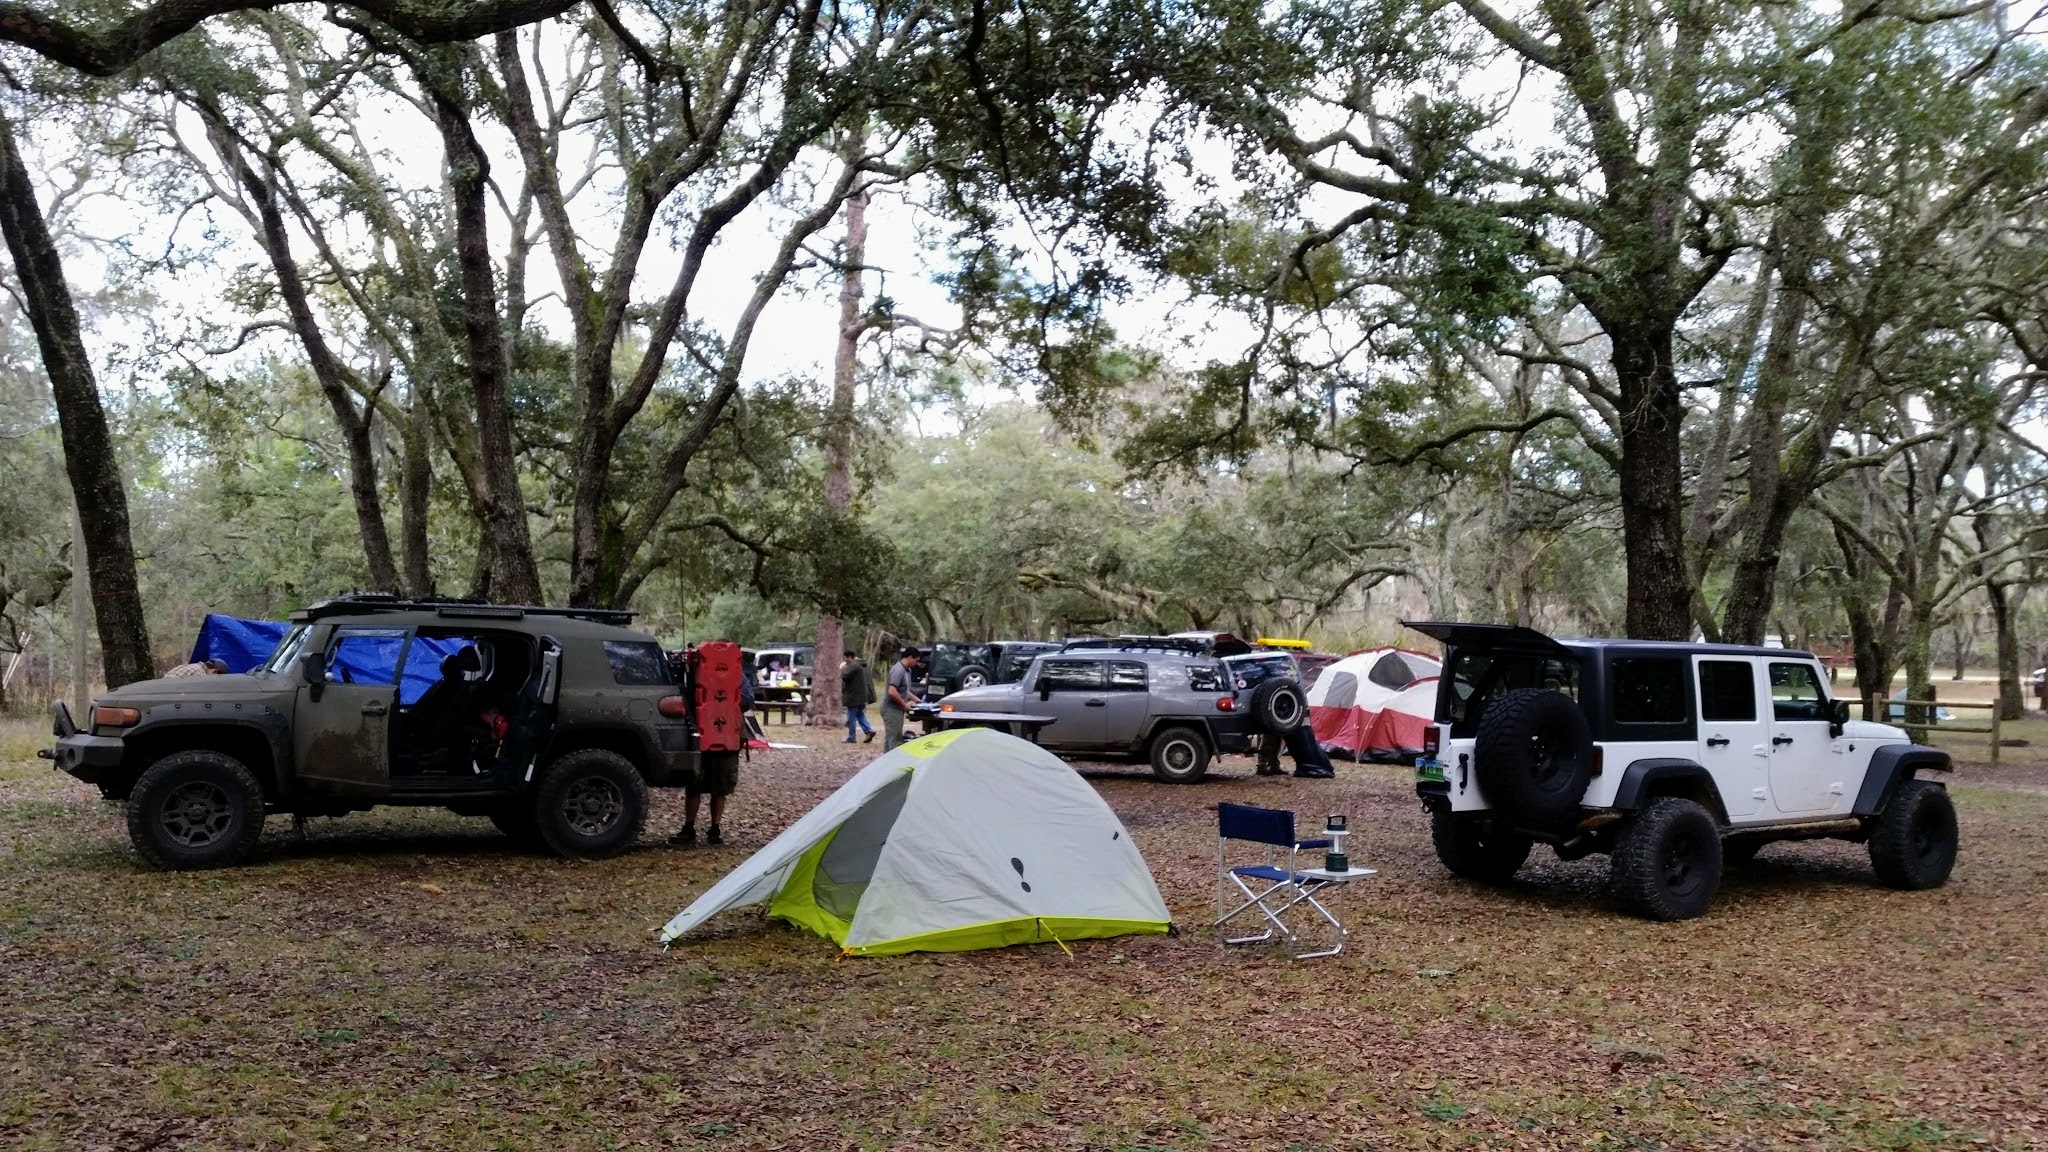 Jeep Wrangler JL Pictures of camping with your Jeep 20150124_161807